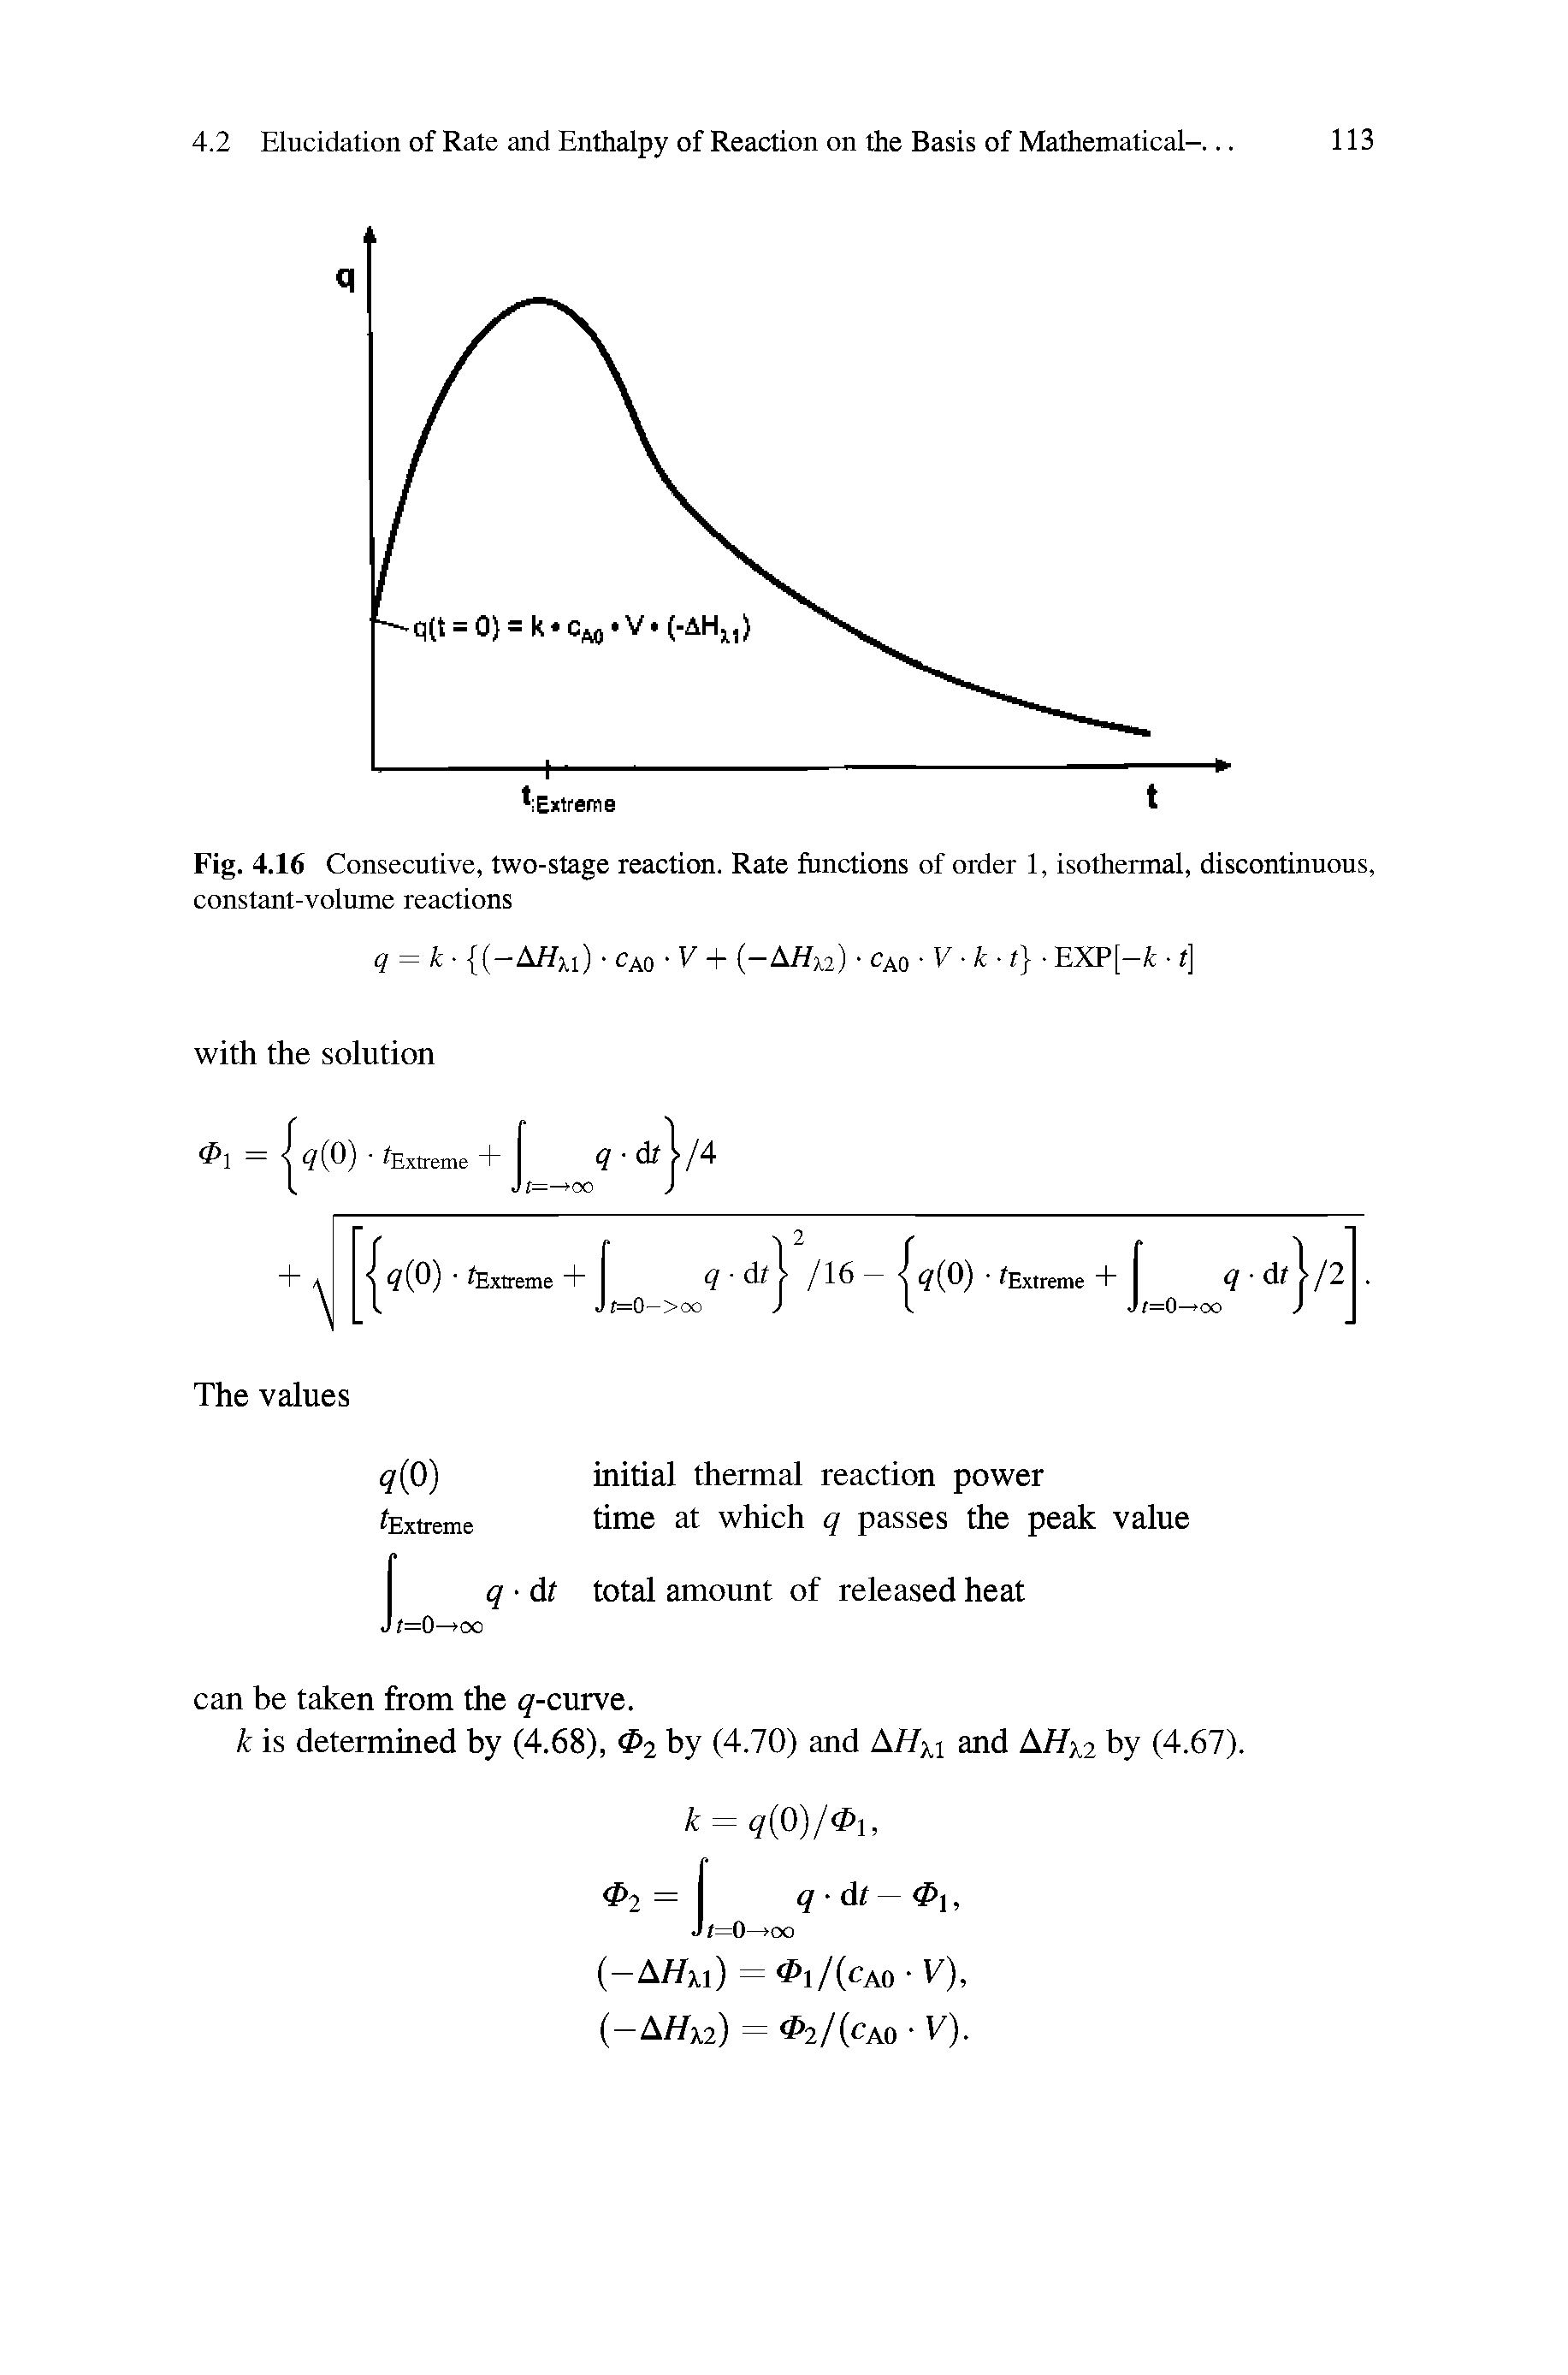 Fig. 4.16 Consecutive, two-stage reaction. Rate functions of order 1, isothermal, discontinuous,...